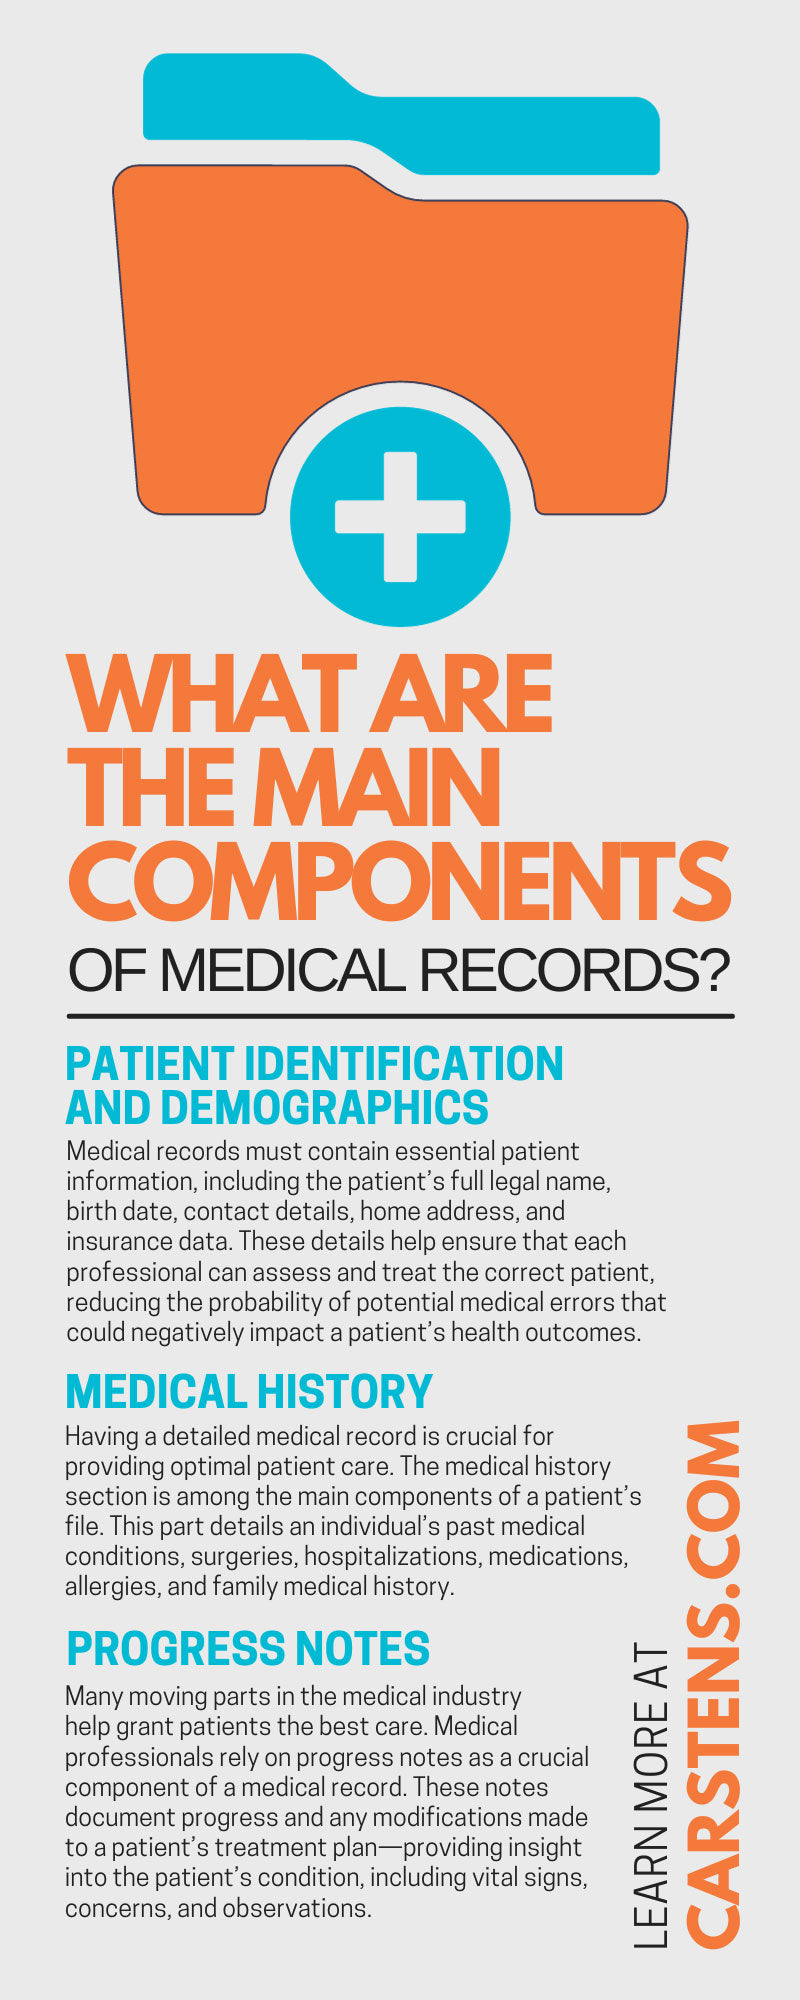 What Are the Main Components of Medical Records?